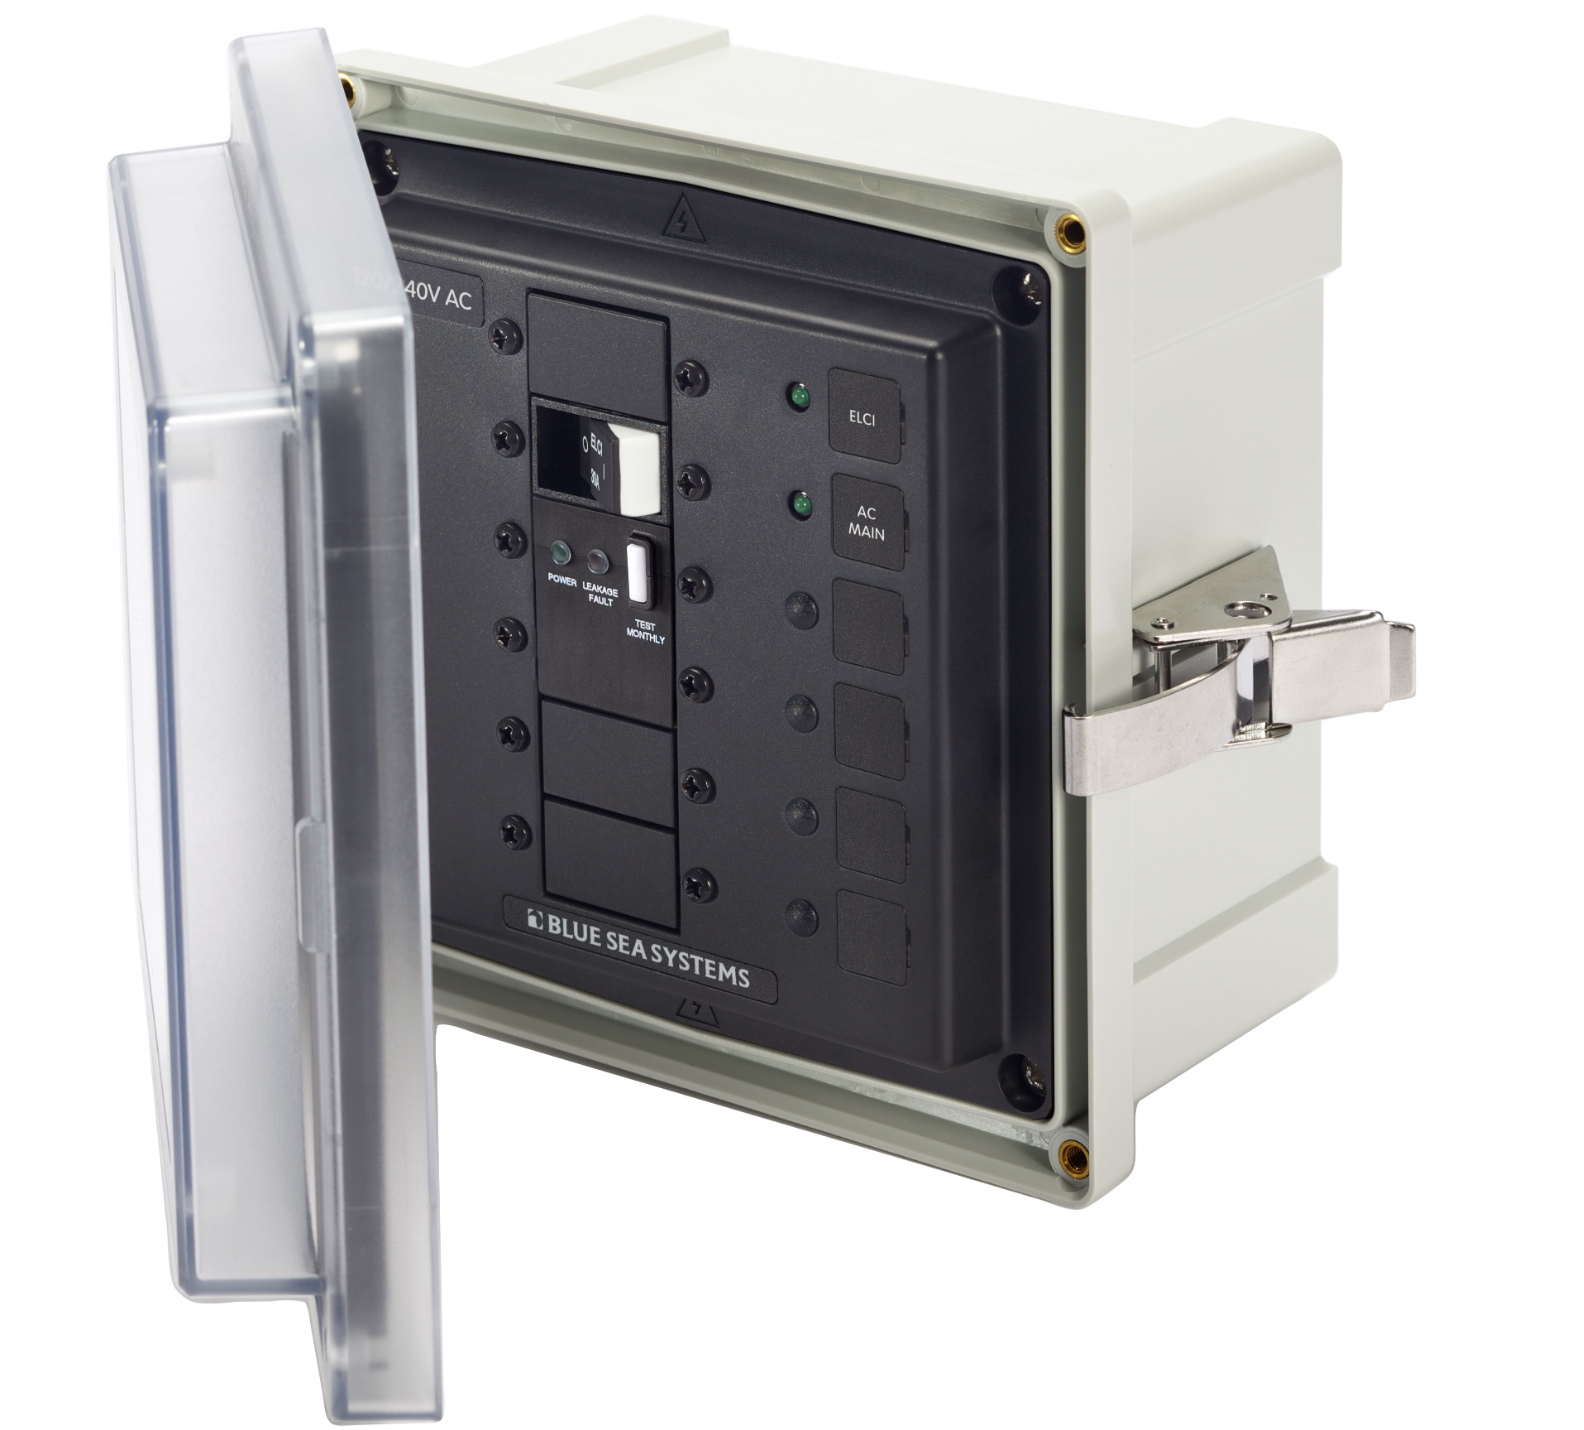 SMS Surface Mount System Panel Enclosure - 240V AC / 50A ELCI Main - For Isolation Transformer